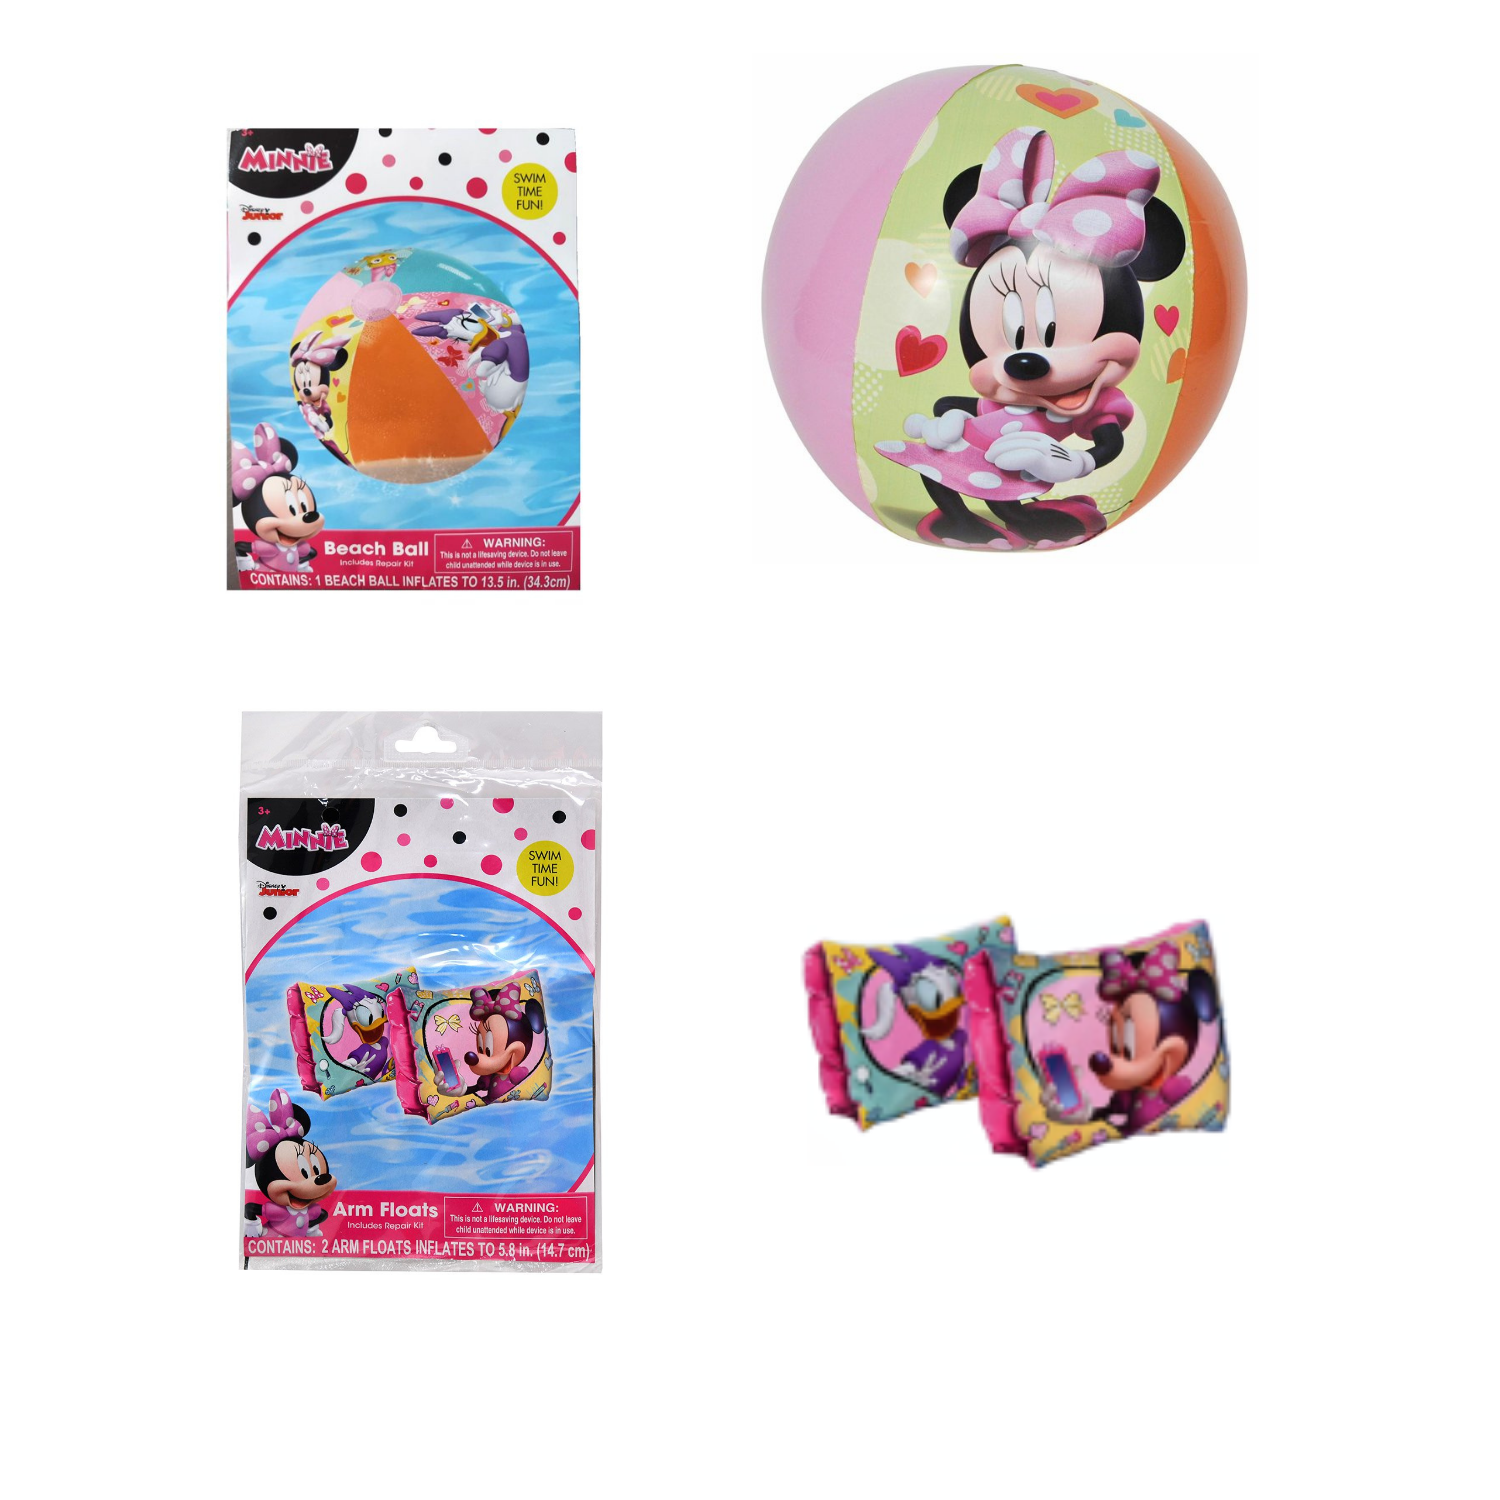 Includes: Swim Ring Toy Story 3pc Summer Fun Swim Set Bundle Plus Character Stickers! Arm Band Floaties & Beach Ball 